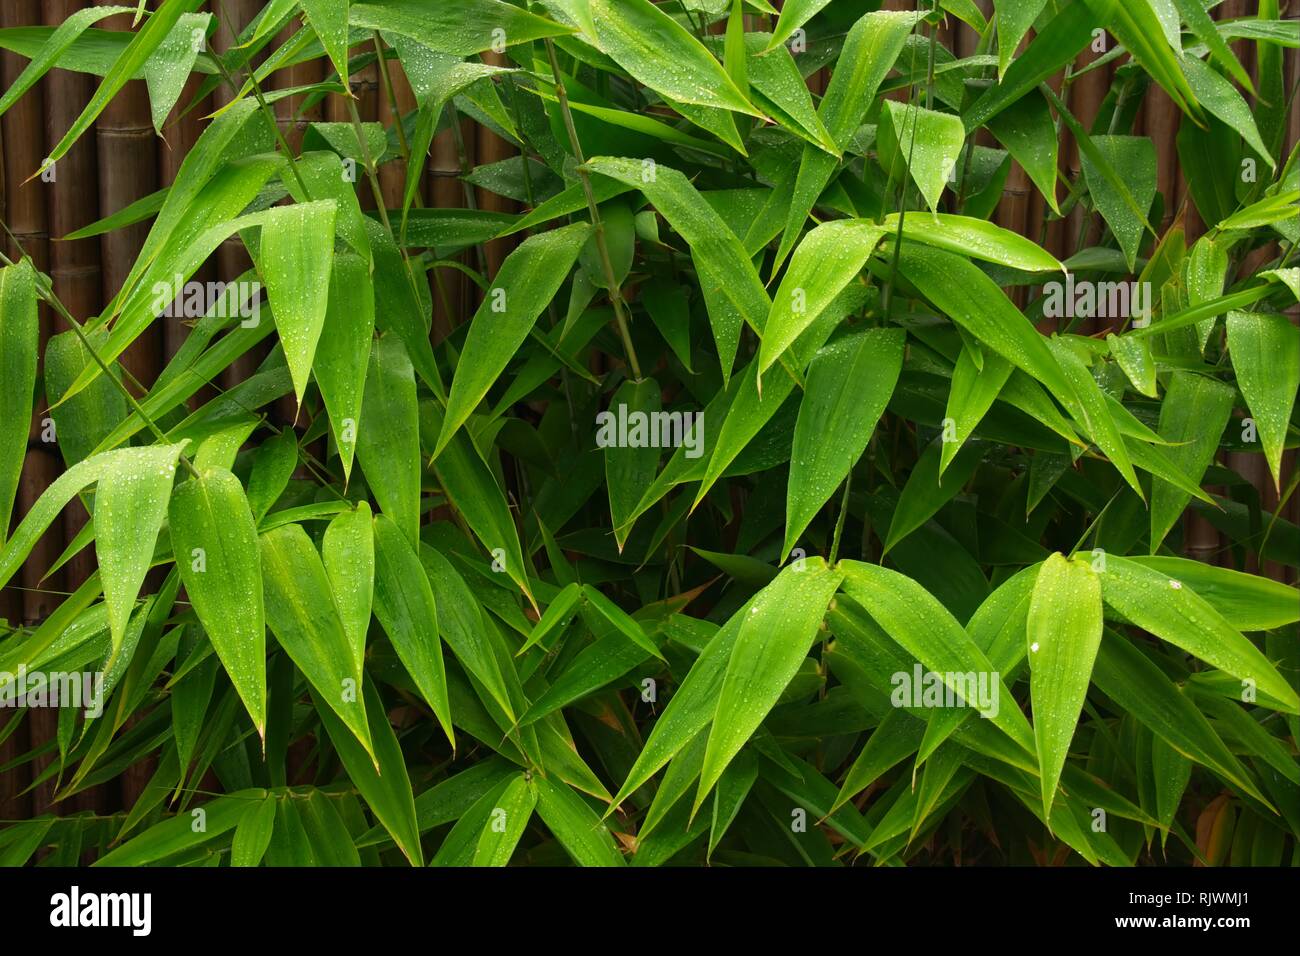 Tiger grass plant used for screening in a tropical backyard Stock Photo